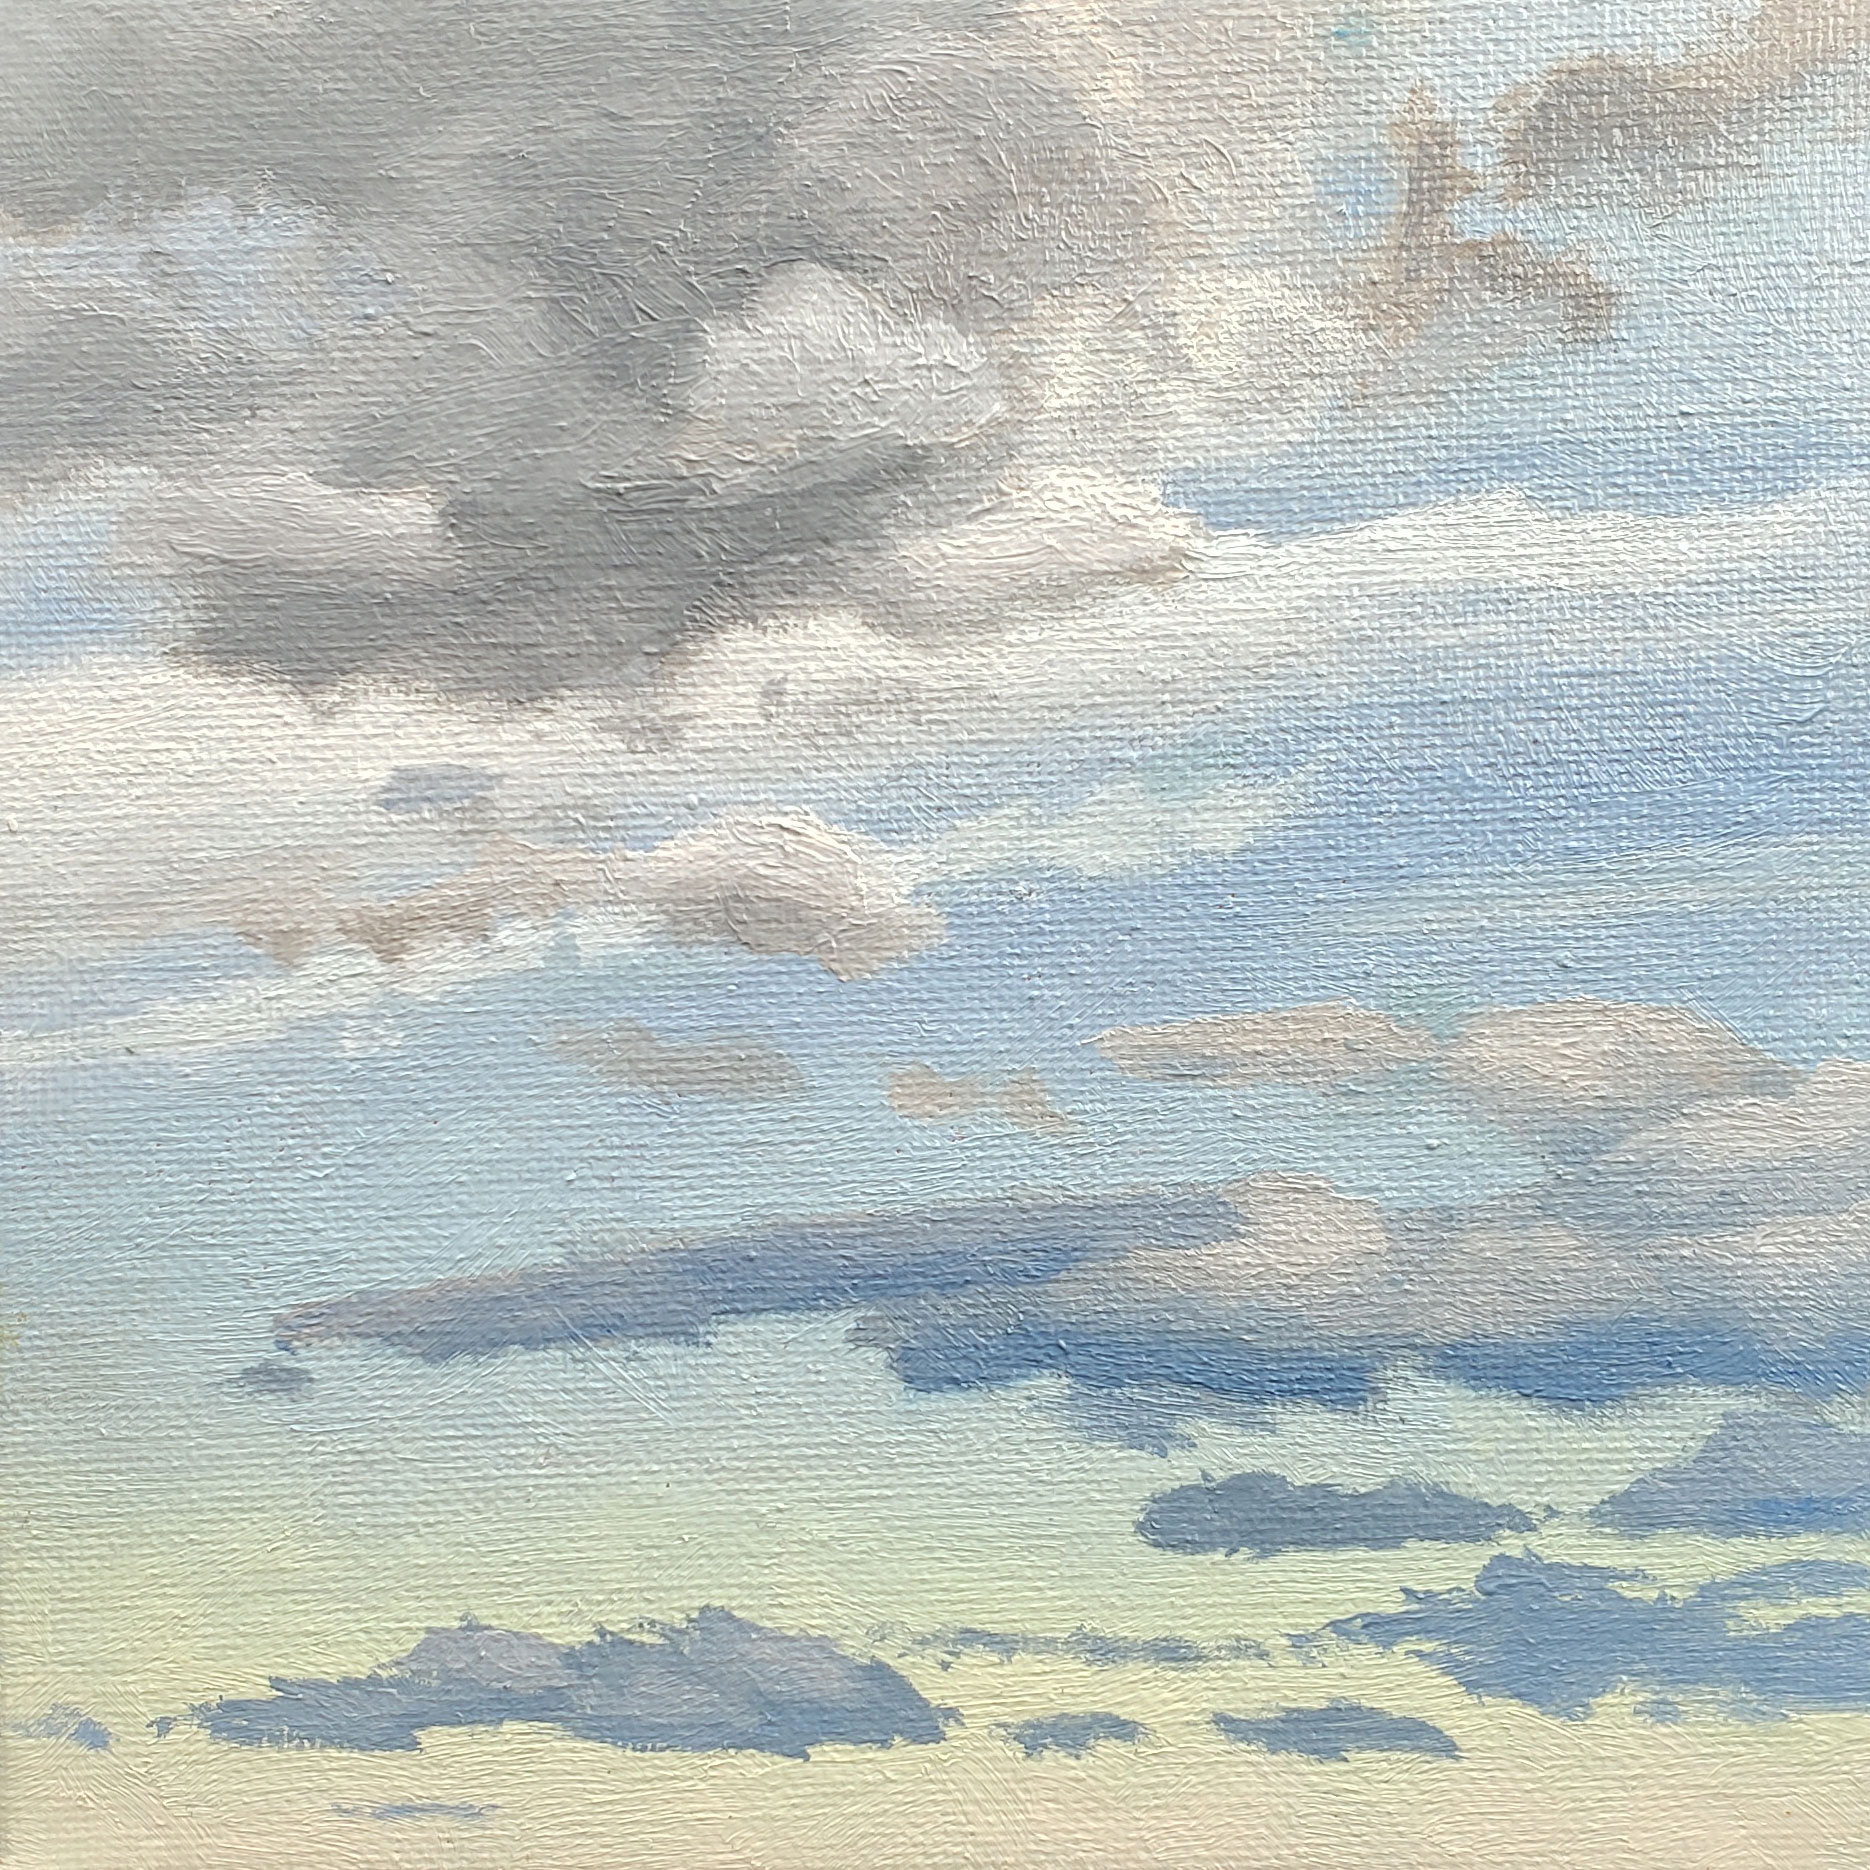 overlapping clouds against a light blue to butter yellow sky gradient